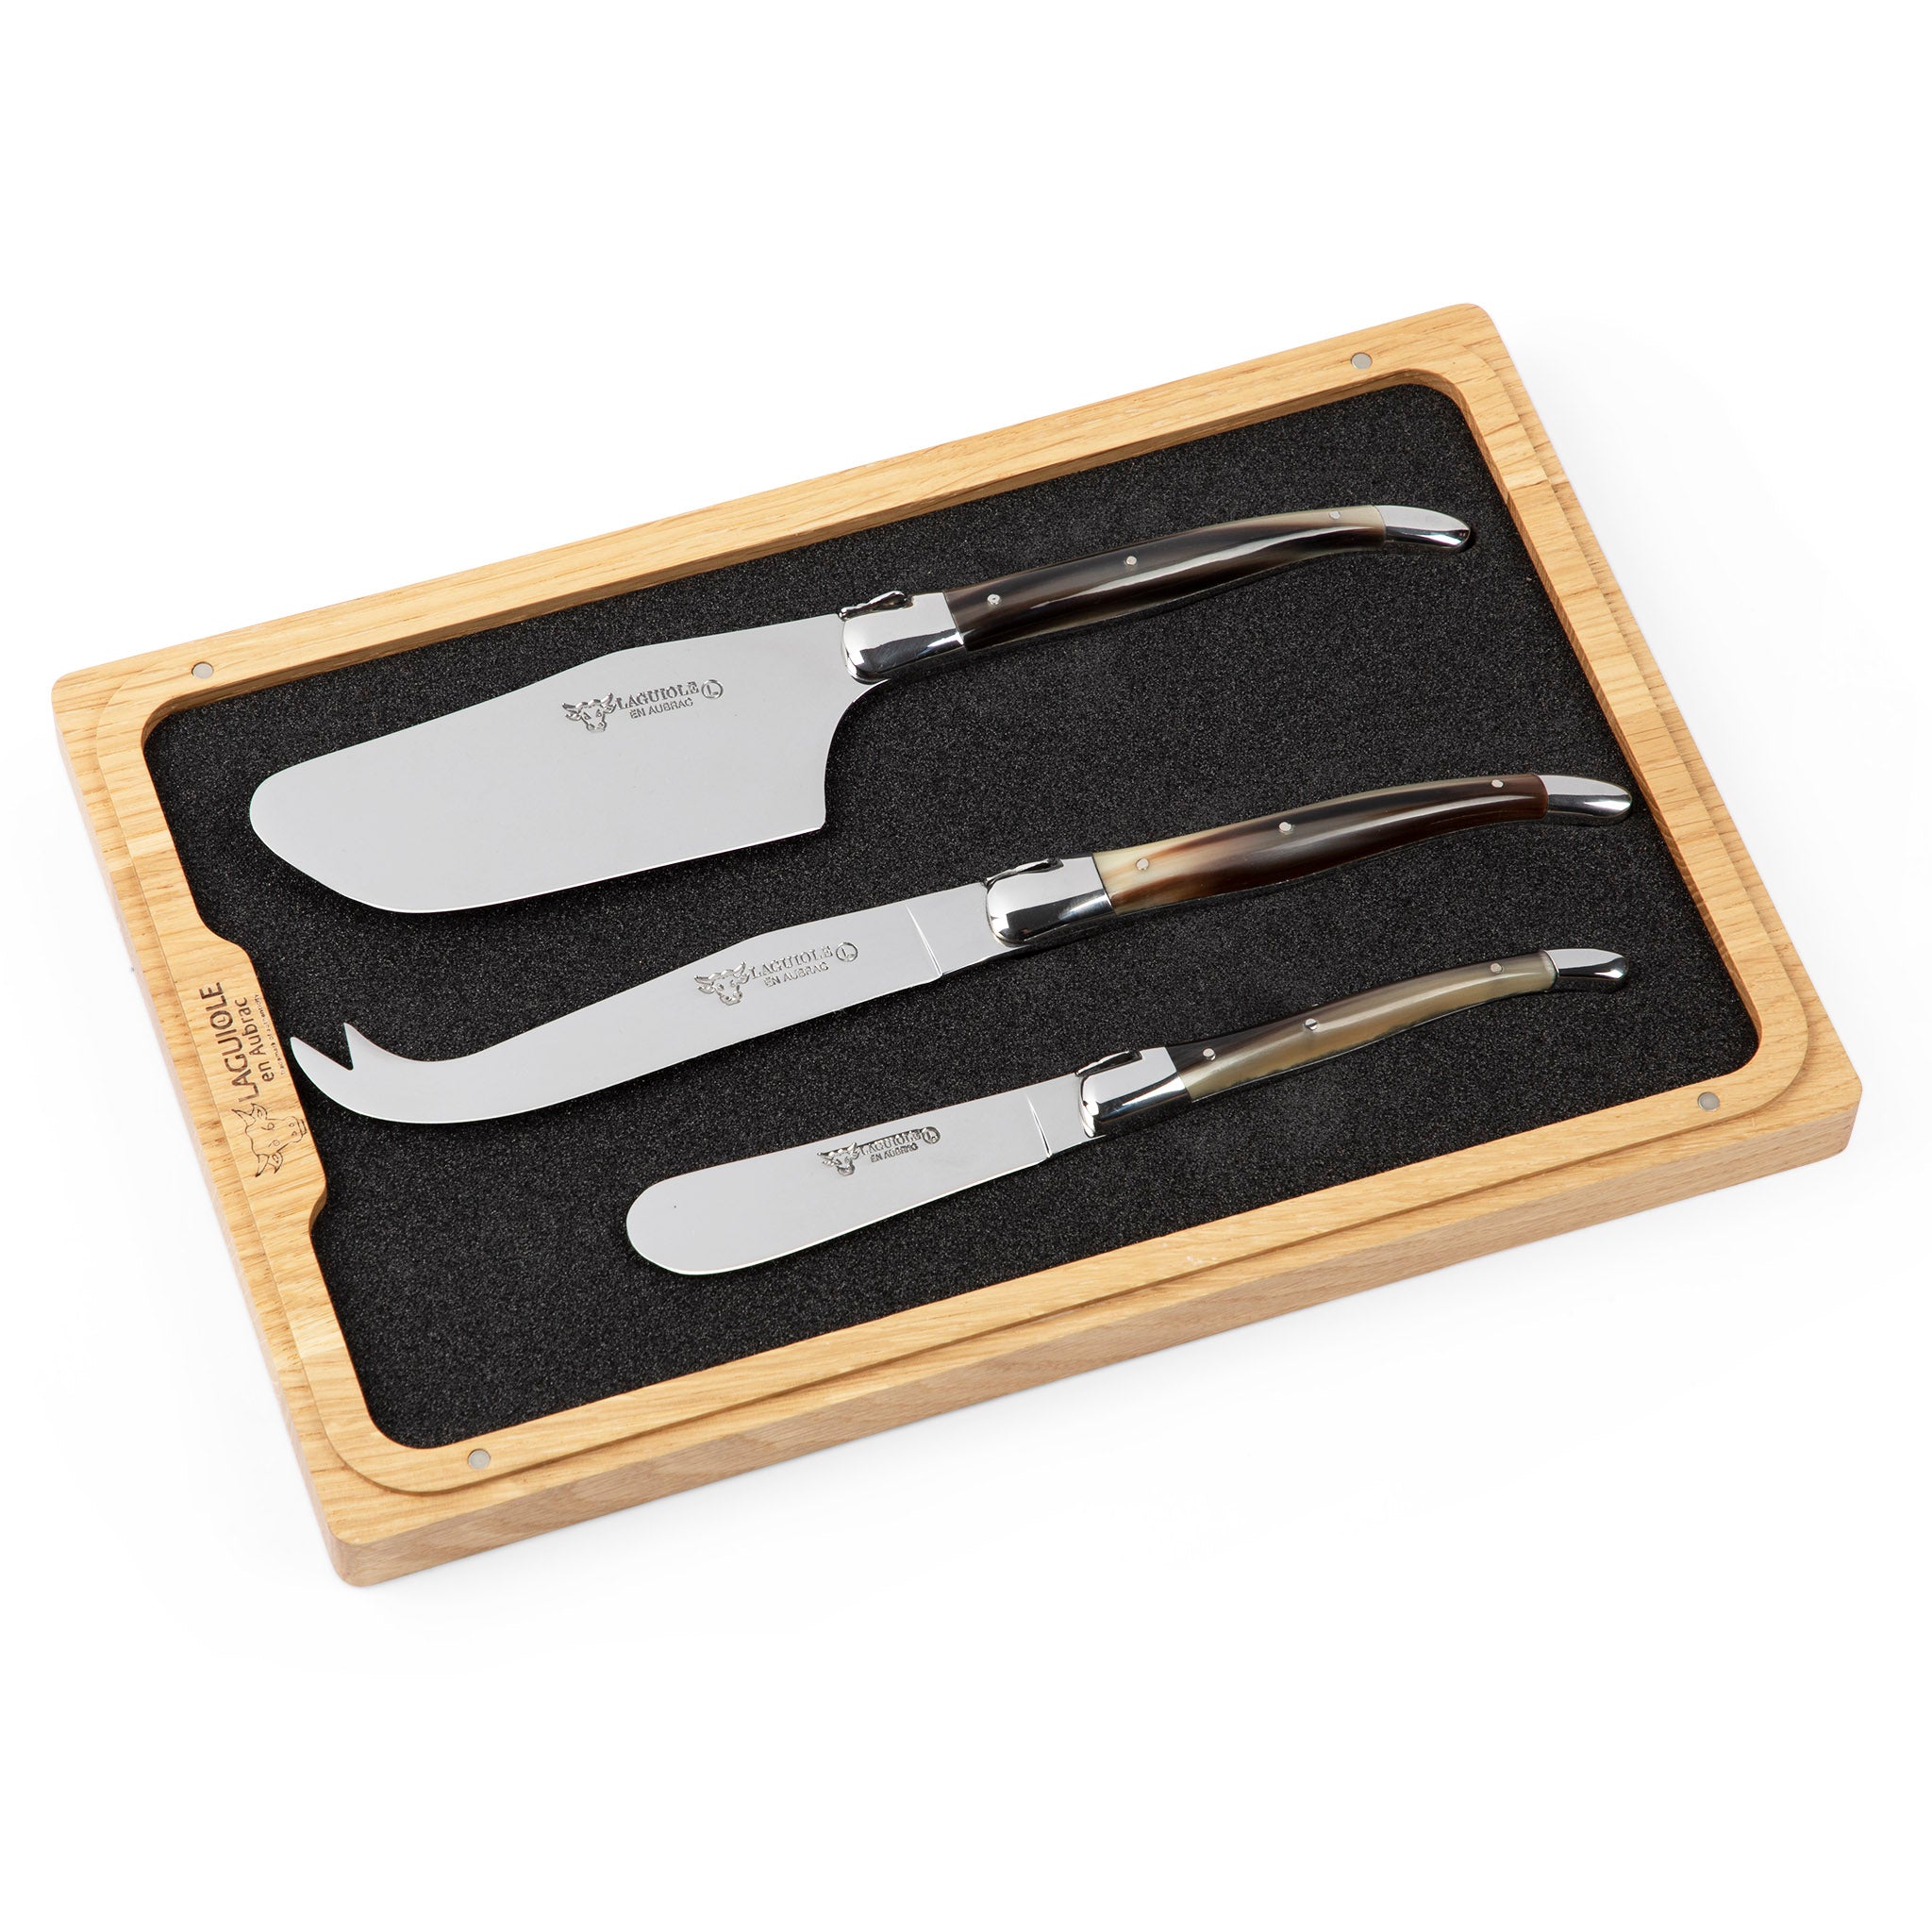 Laguoile Three Piece Cheese Knife Set Horn